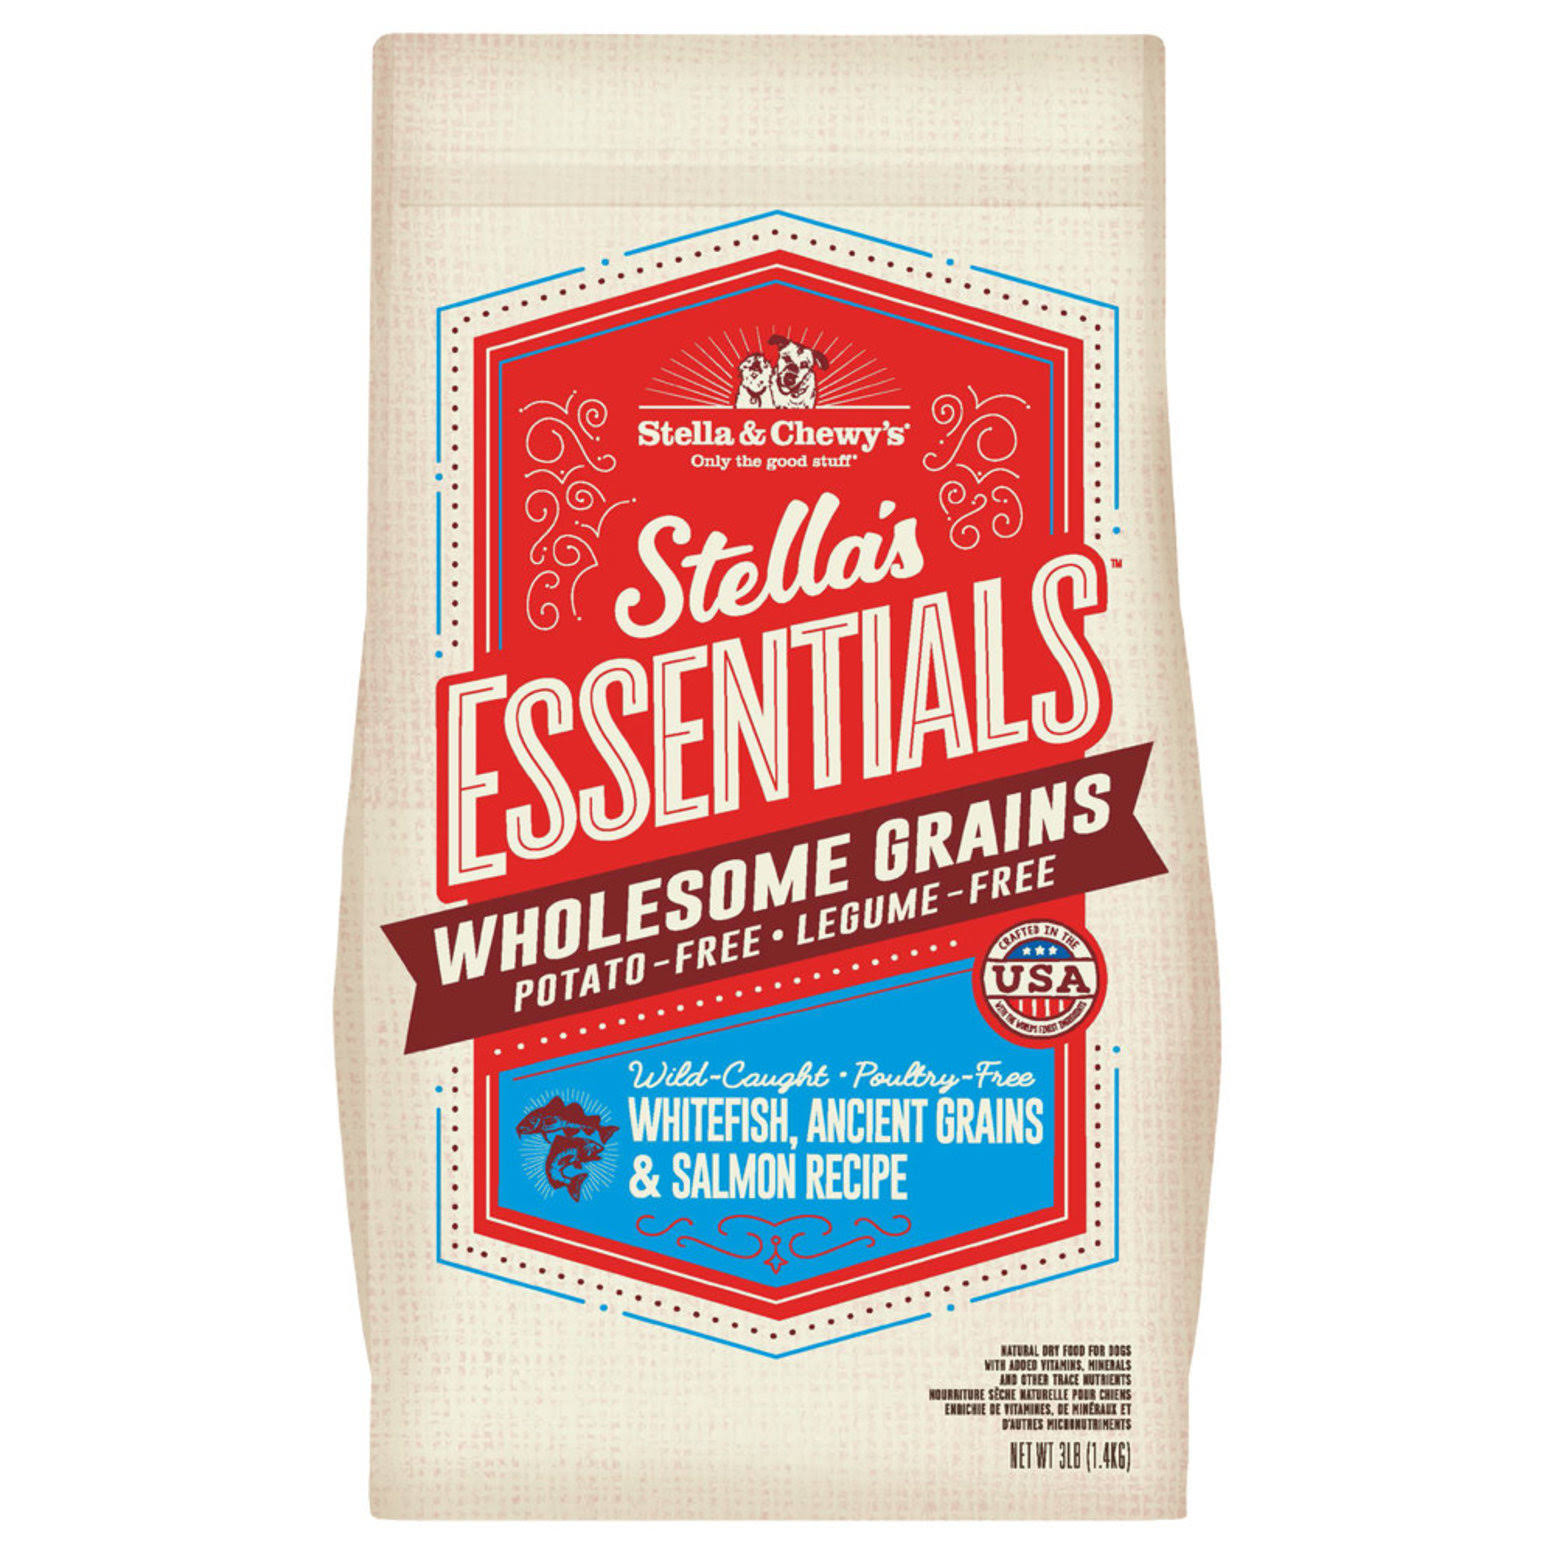 Stella & Chewy's Essentials Wholesome Grains - Whitefish, Salmon & Ancient Grains Dog Food (11.4kg/25lb)